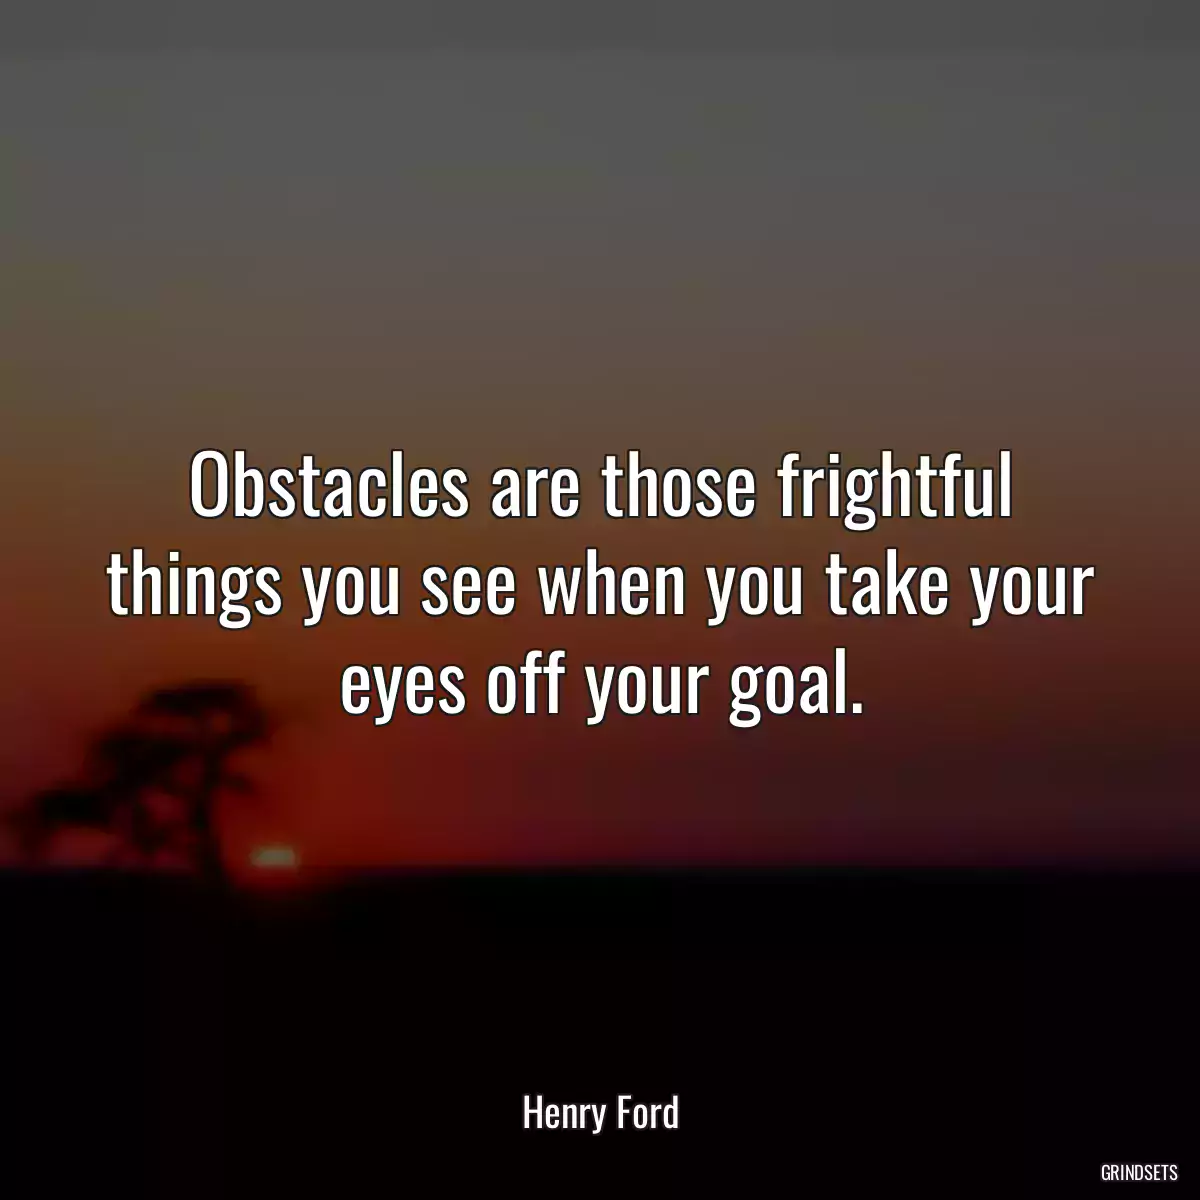 Obstacles are those frightful things you see when you take your eyes off your goal.